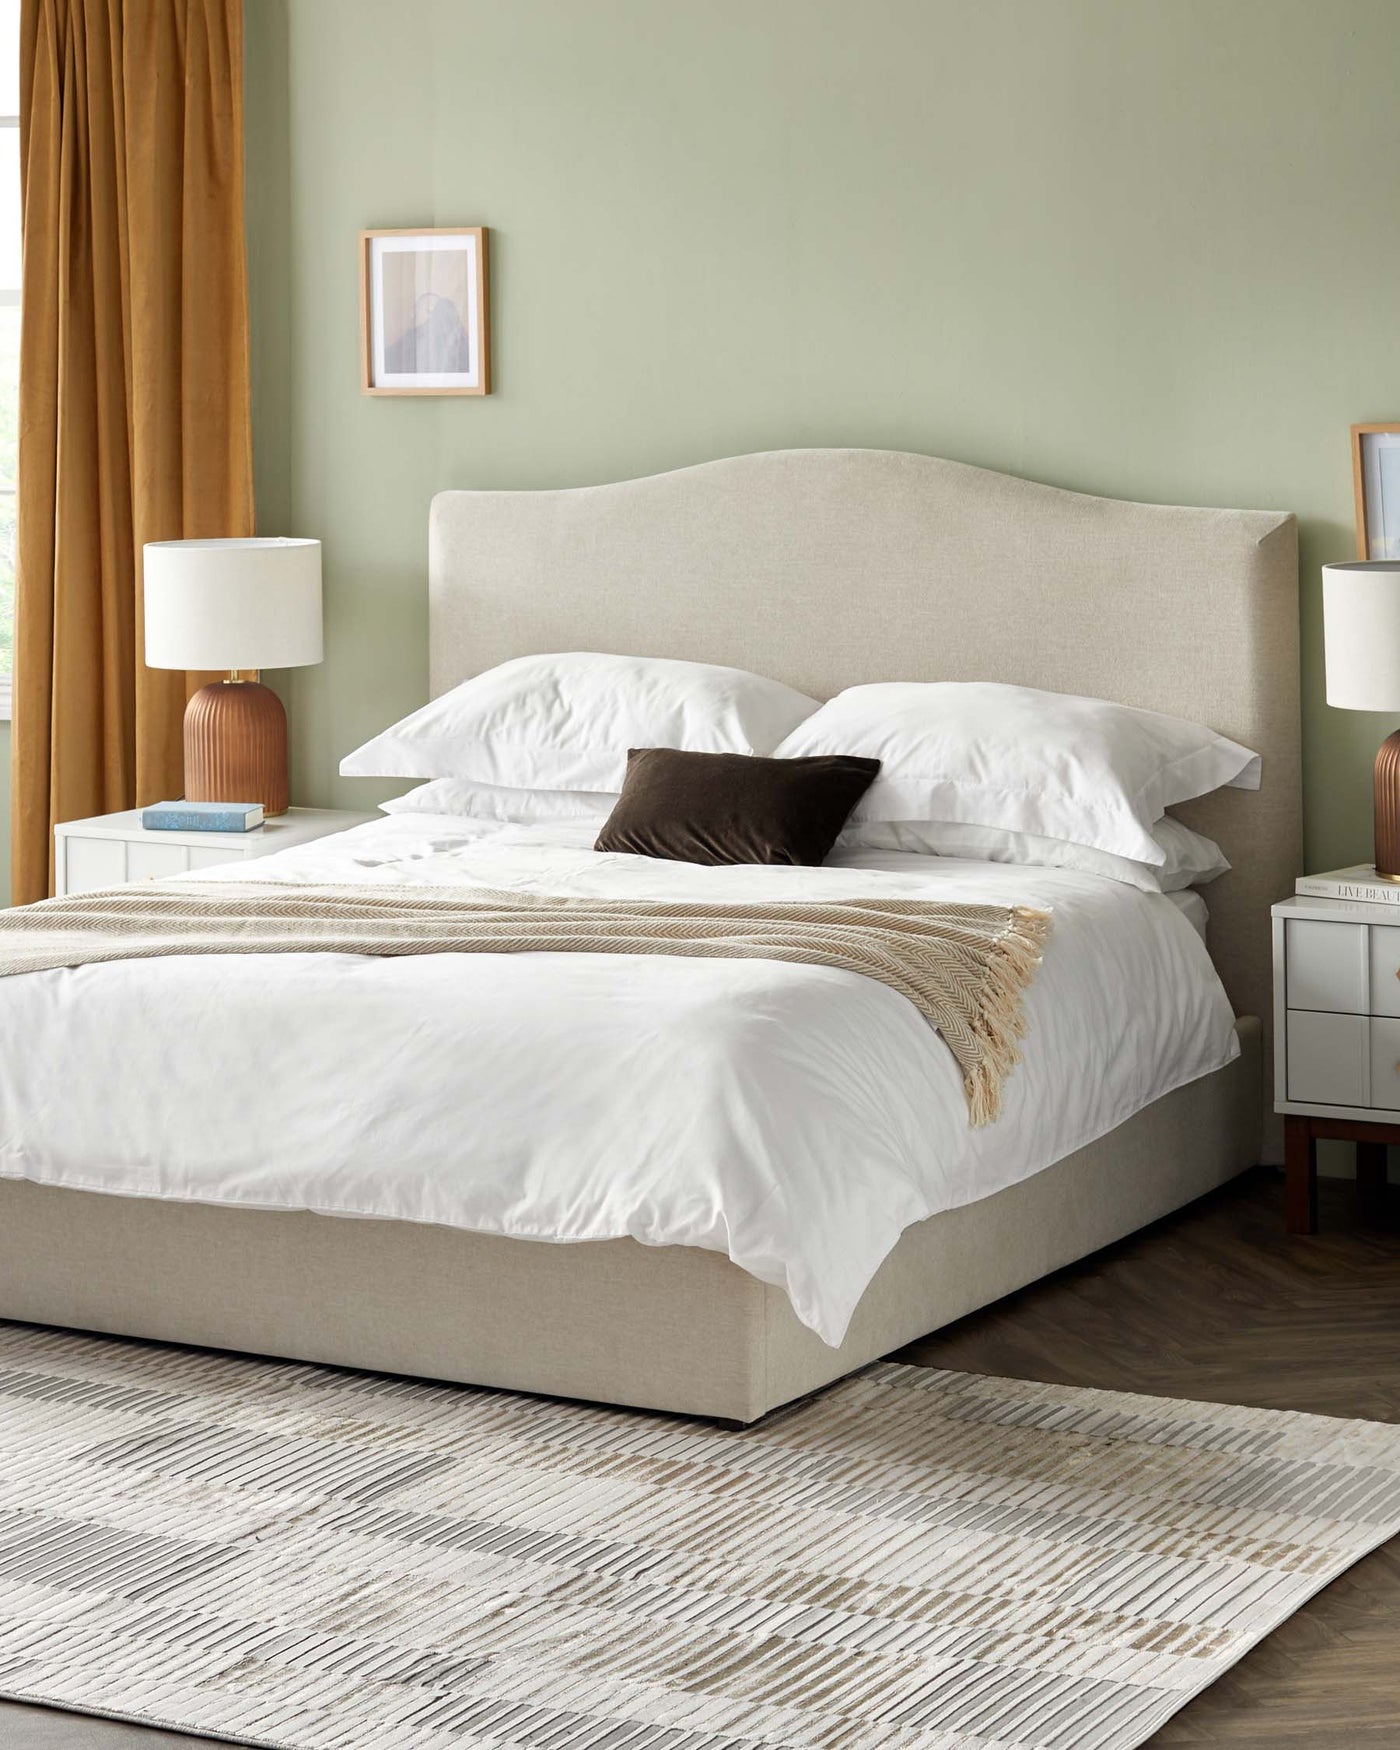 A contemporary bedroom scene featuring a large upholstered bed with a curved headboard in a neutral colour, dressed with crisp white bedding accented by a dark throw pillow. Flanking the bed are two matching white nightstands with a modern design, each adorned with a table lamp featuring a cylindrical shade and a warm-toned base. The room's decor is completed with a textured striped area rug on a wood floor, adding depth and interest to the space.